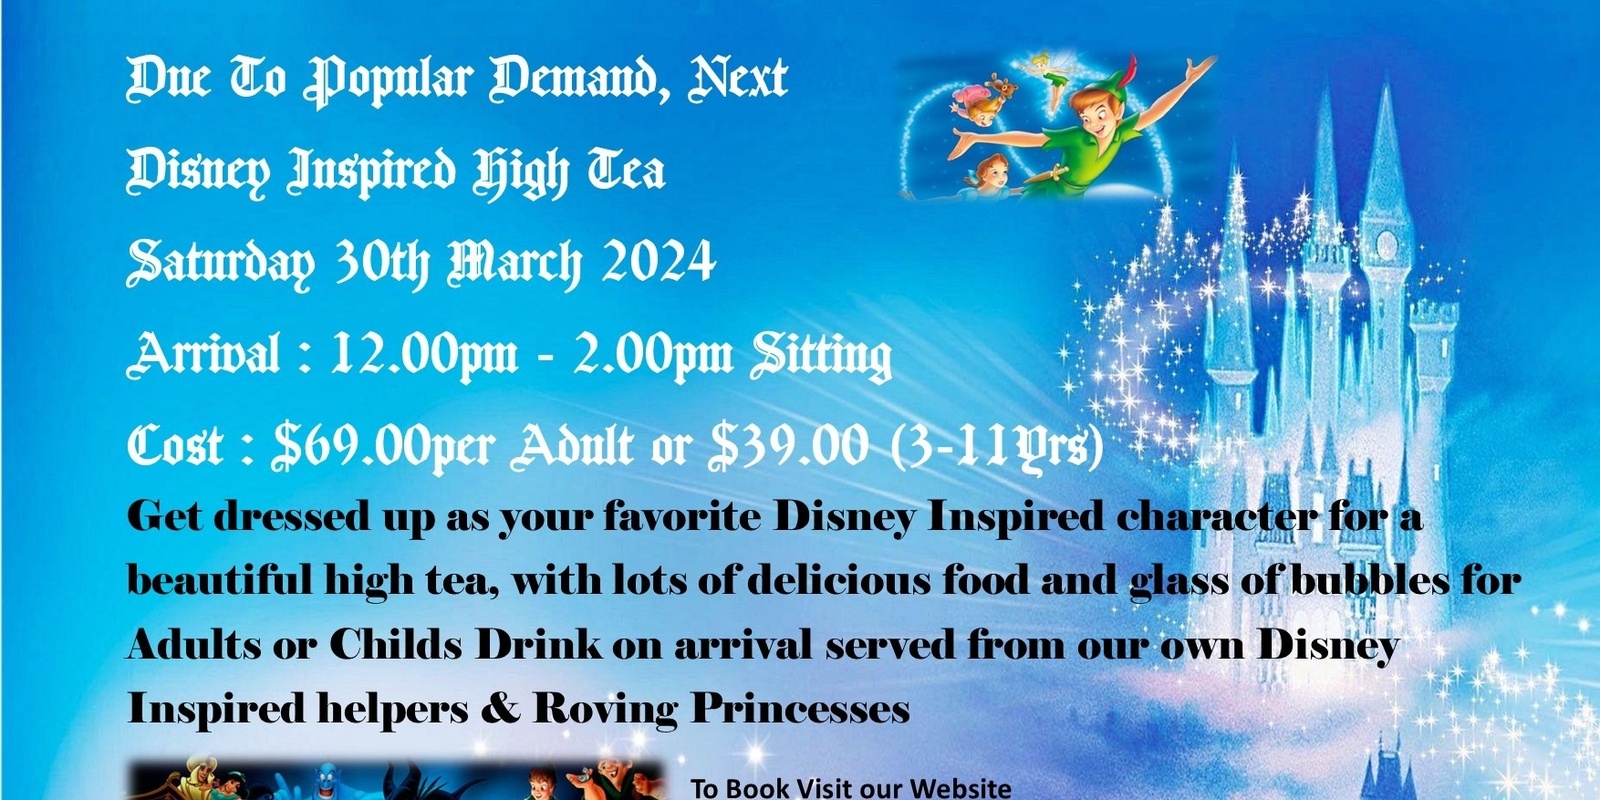 Banner image for Disney Inspired High Tea Saturday 30th March - 12.00pm Sitting